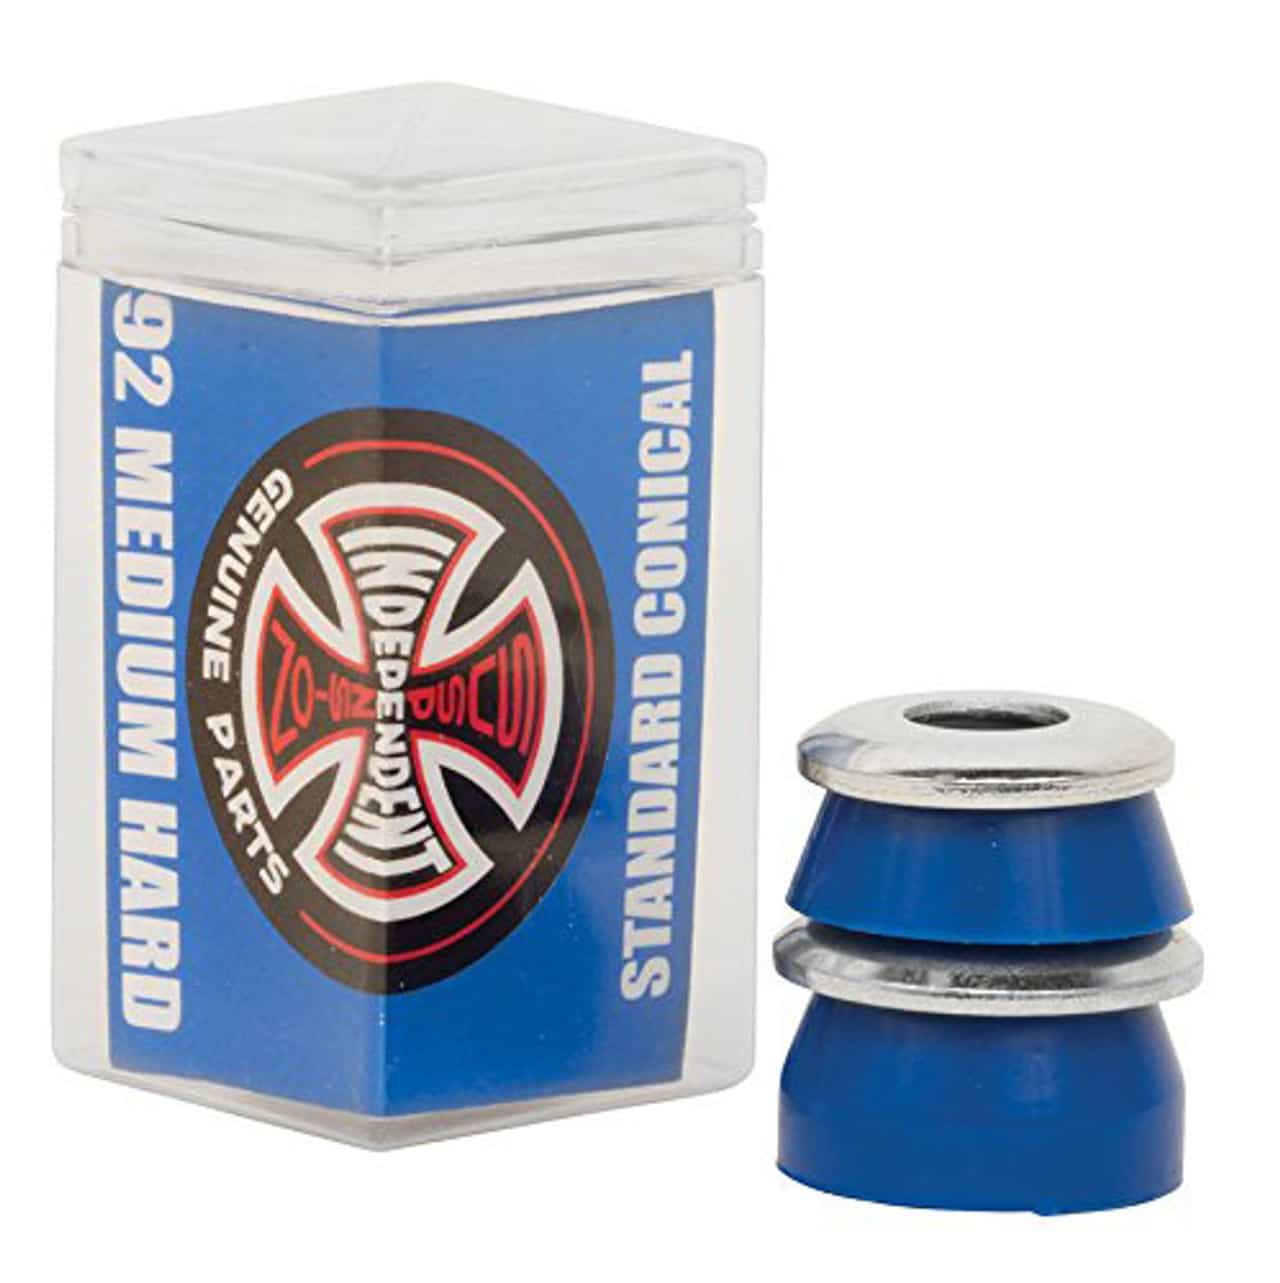 Independent Bushings Conical Medium Hard 92a Blue